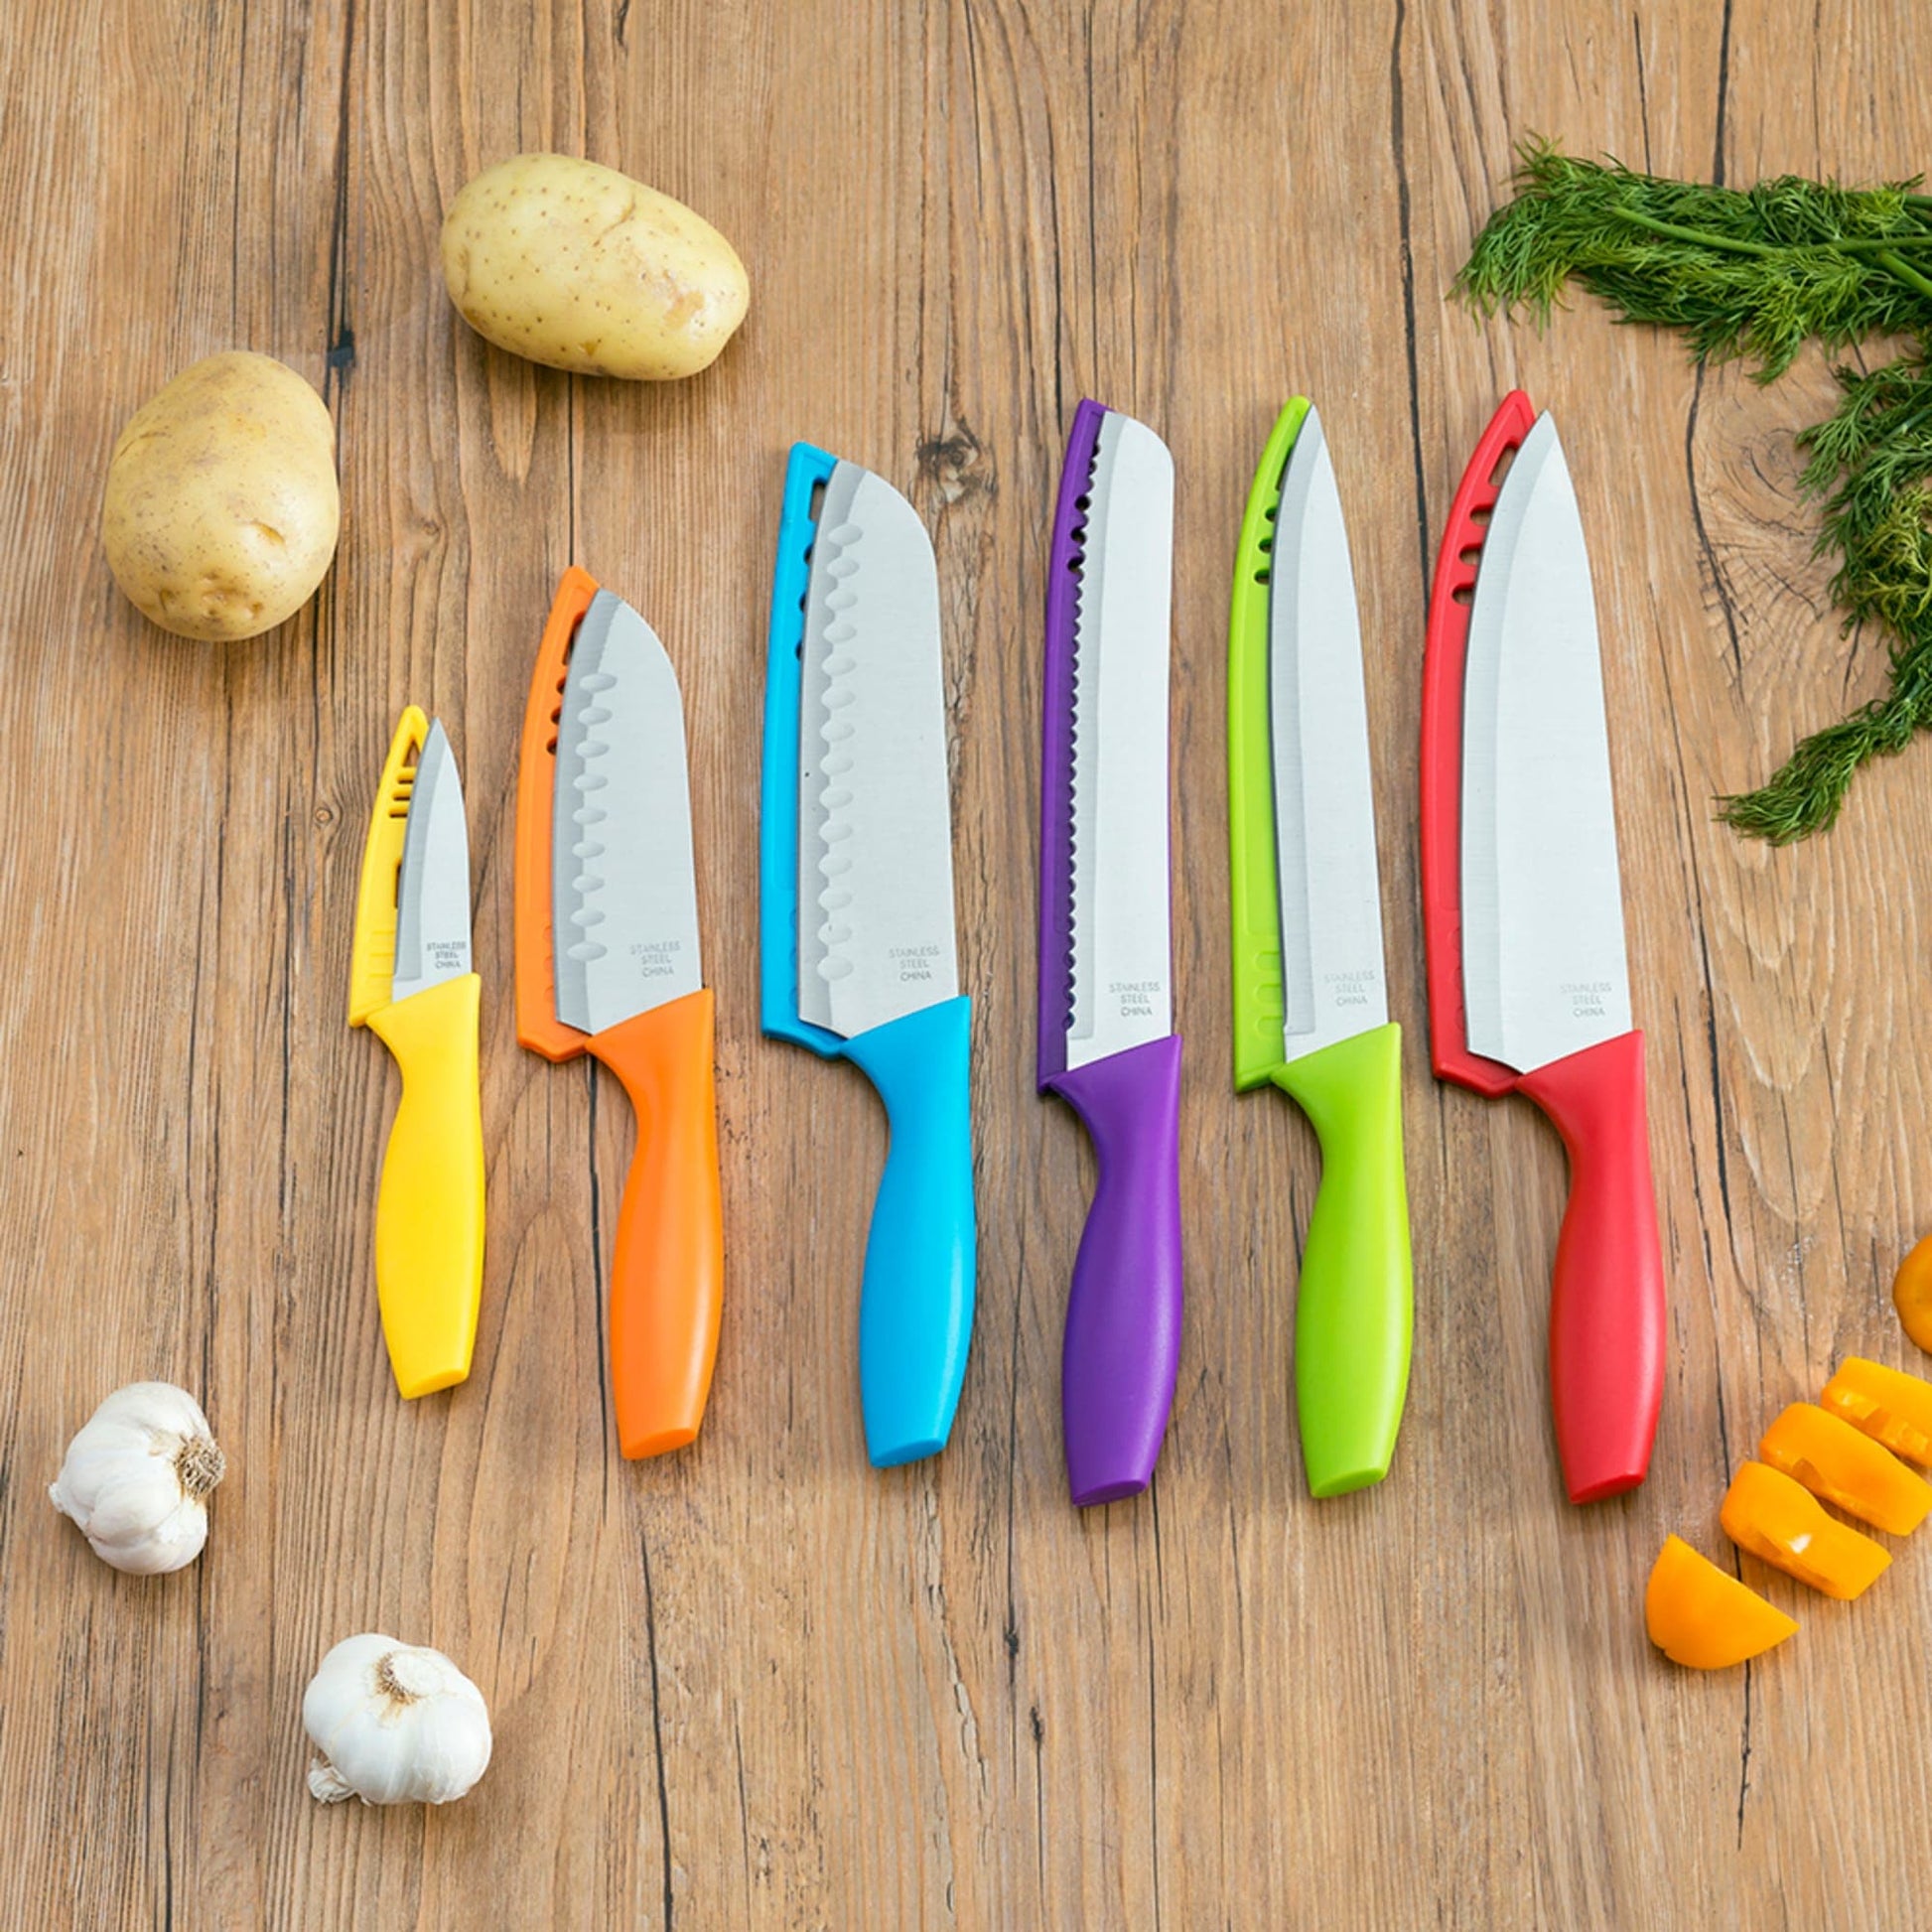 6 Stainless Steel Knife Set with Colorful Slip Covers, FOOD PREP